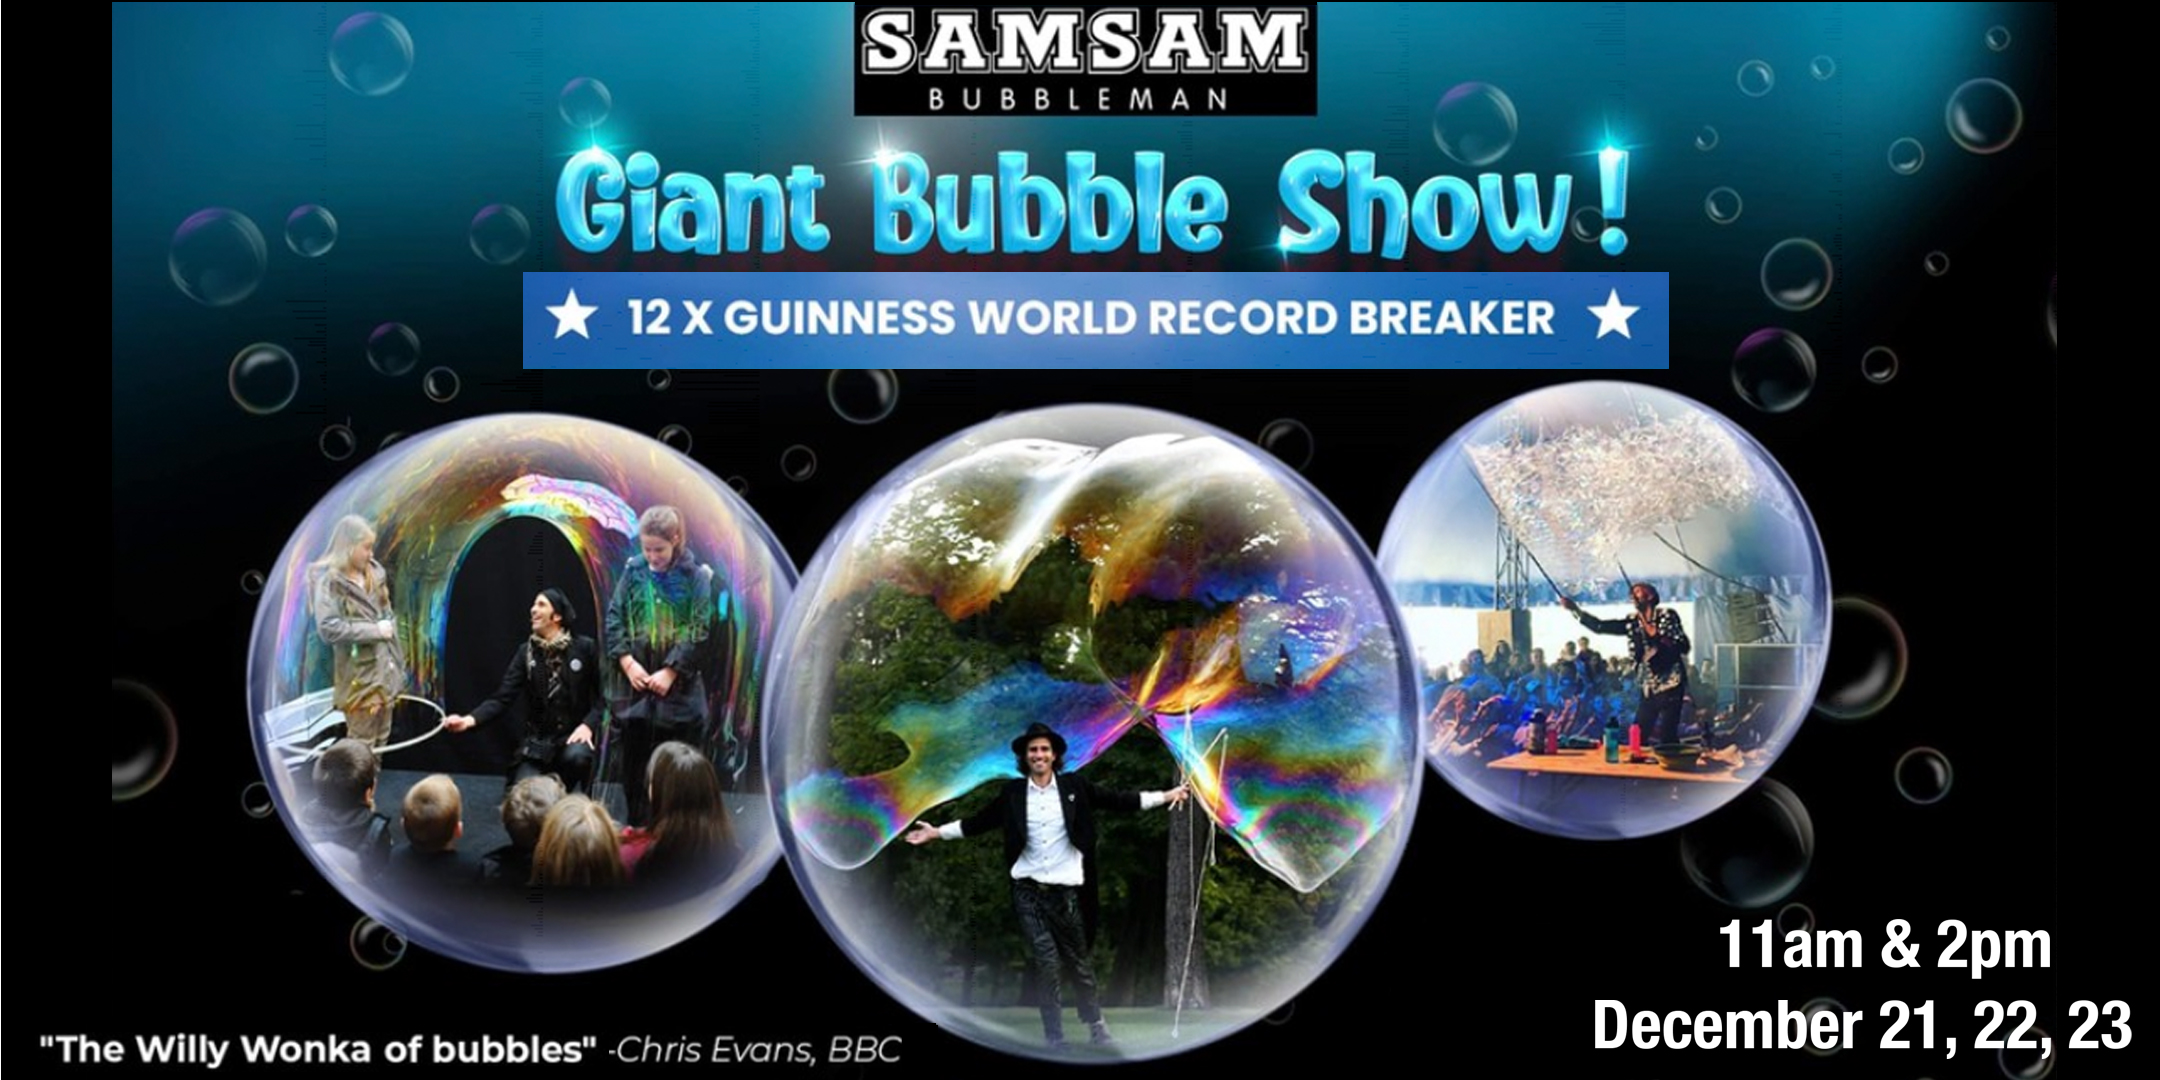 21st/22nd/23rd December: GIANT BUBBLE SHOW with Samsam Bubbleman!